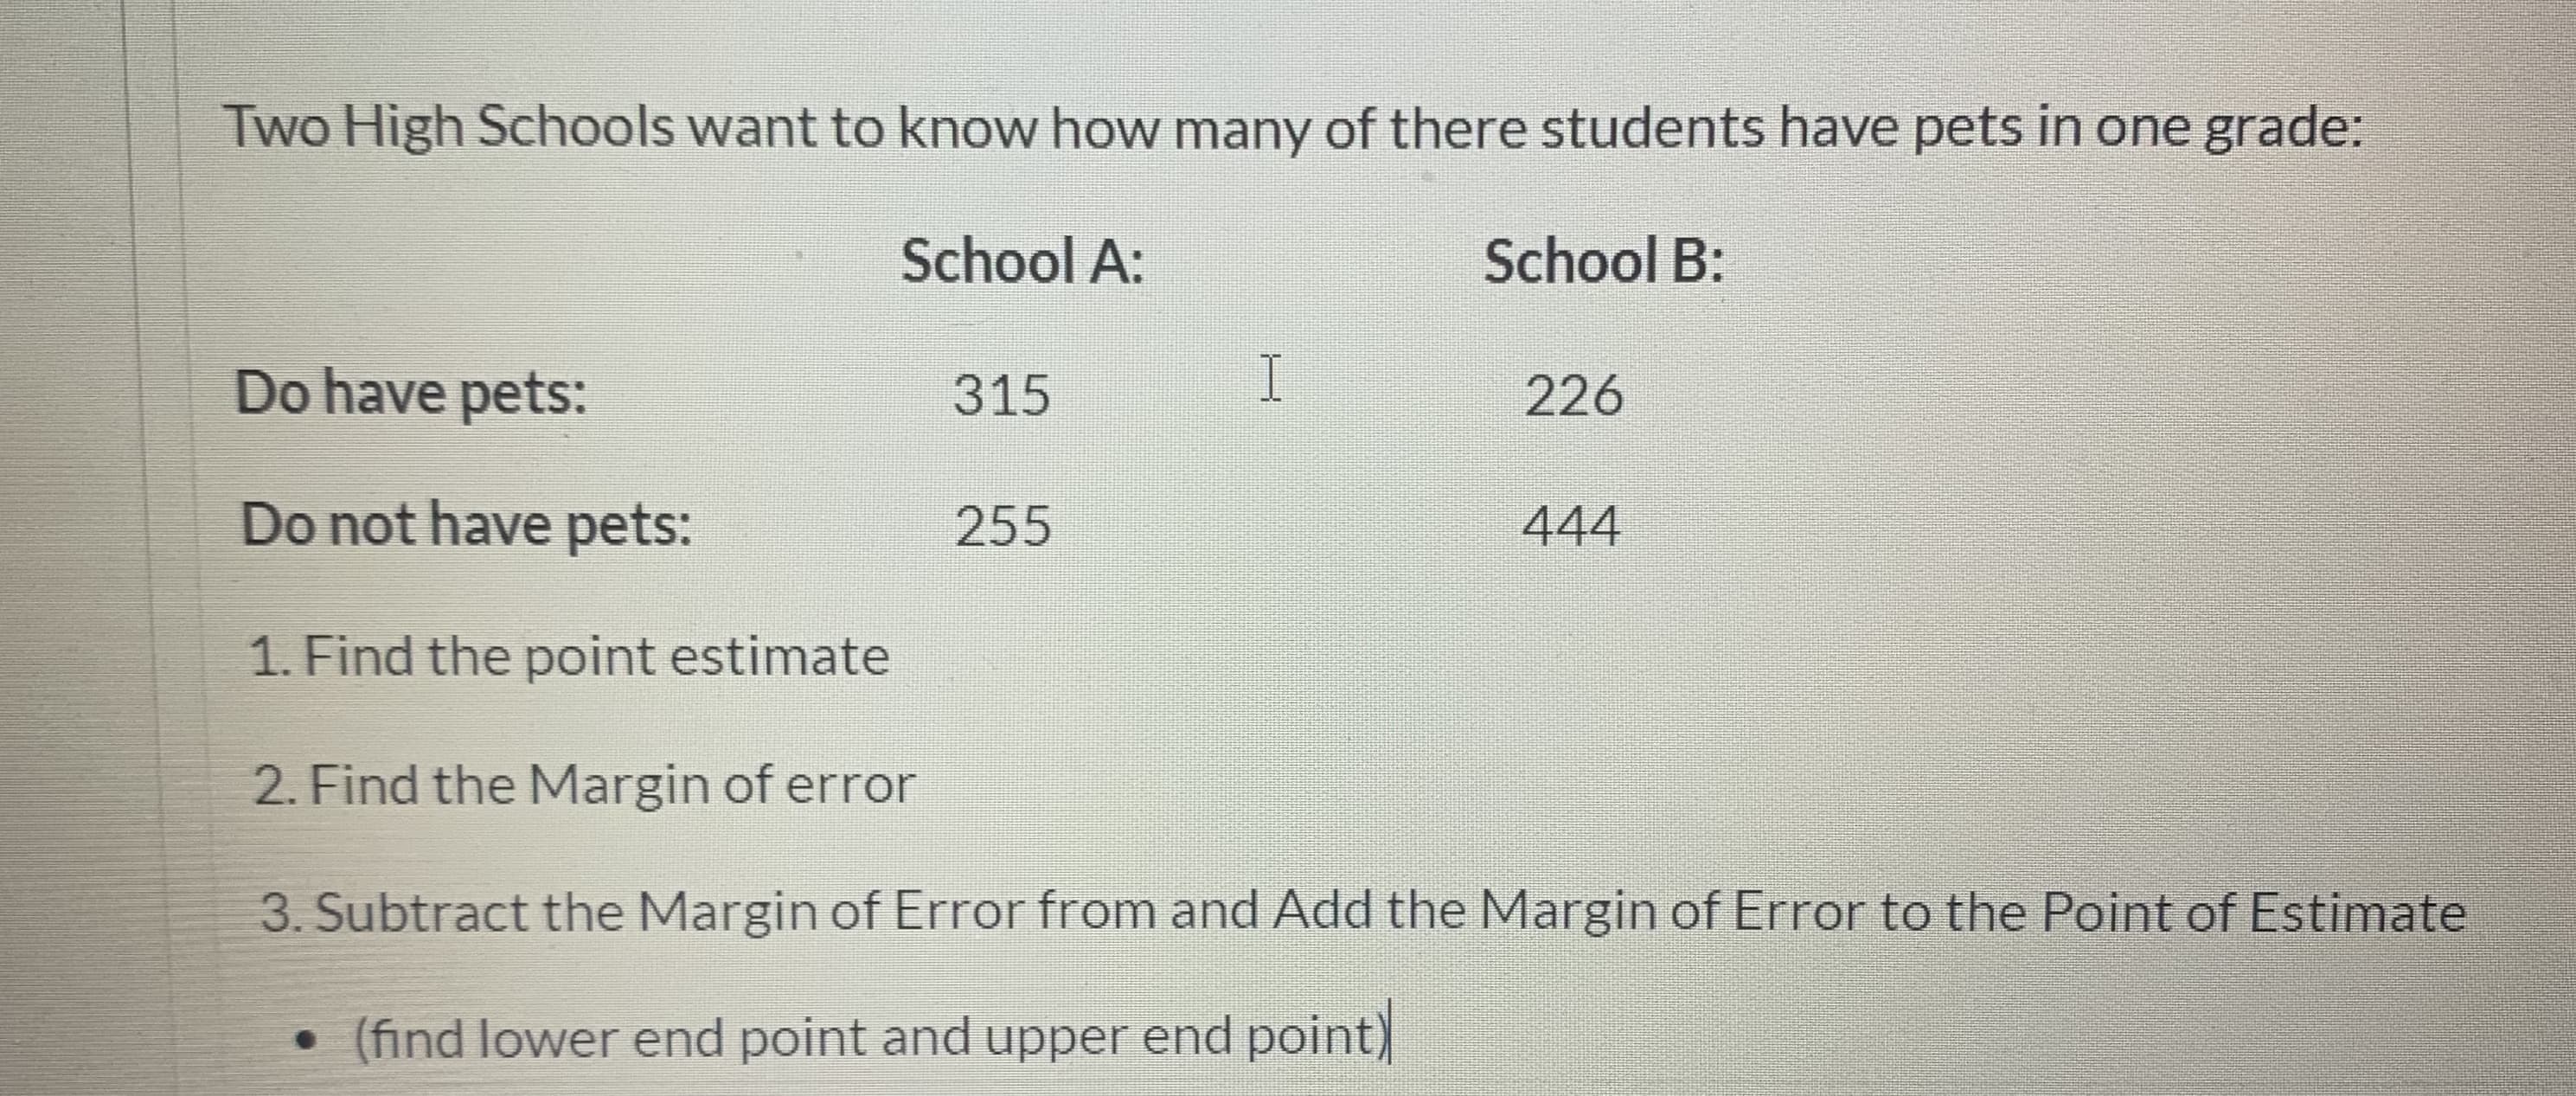 Two High Schools want to know how many of there students have pets in
School A:
School B:
Do have pets:
315
226
Do not have pets:
255
444
1. Find the point estimate
2. Find the Margin of error
3. Subtract the Margin of Error from and Add the Margin of Error to the Point of Estimate
(find lower end point and upper end point)
